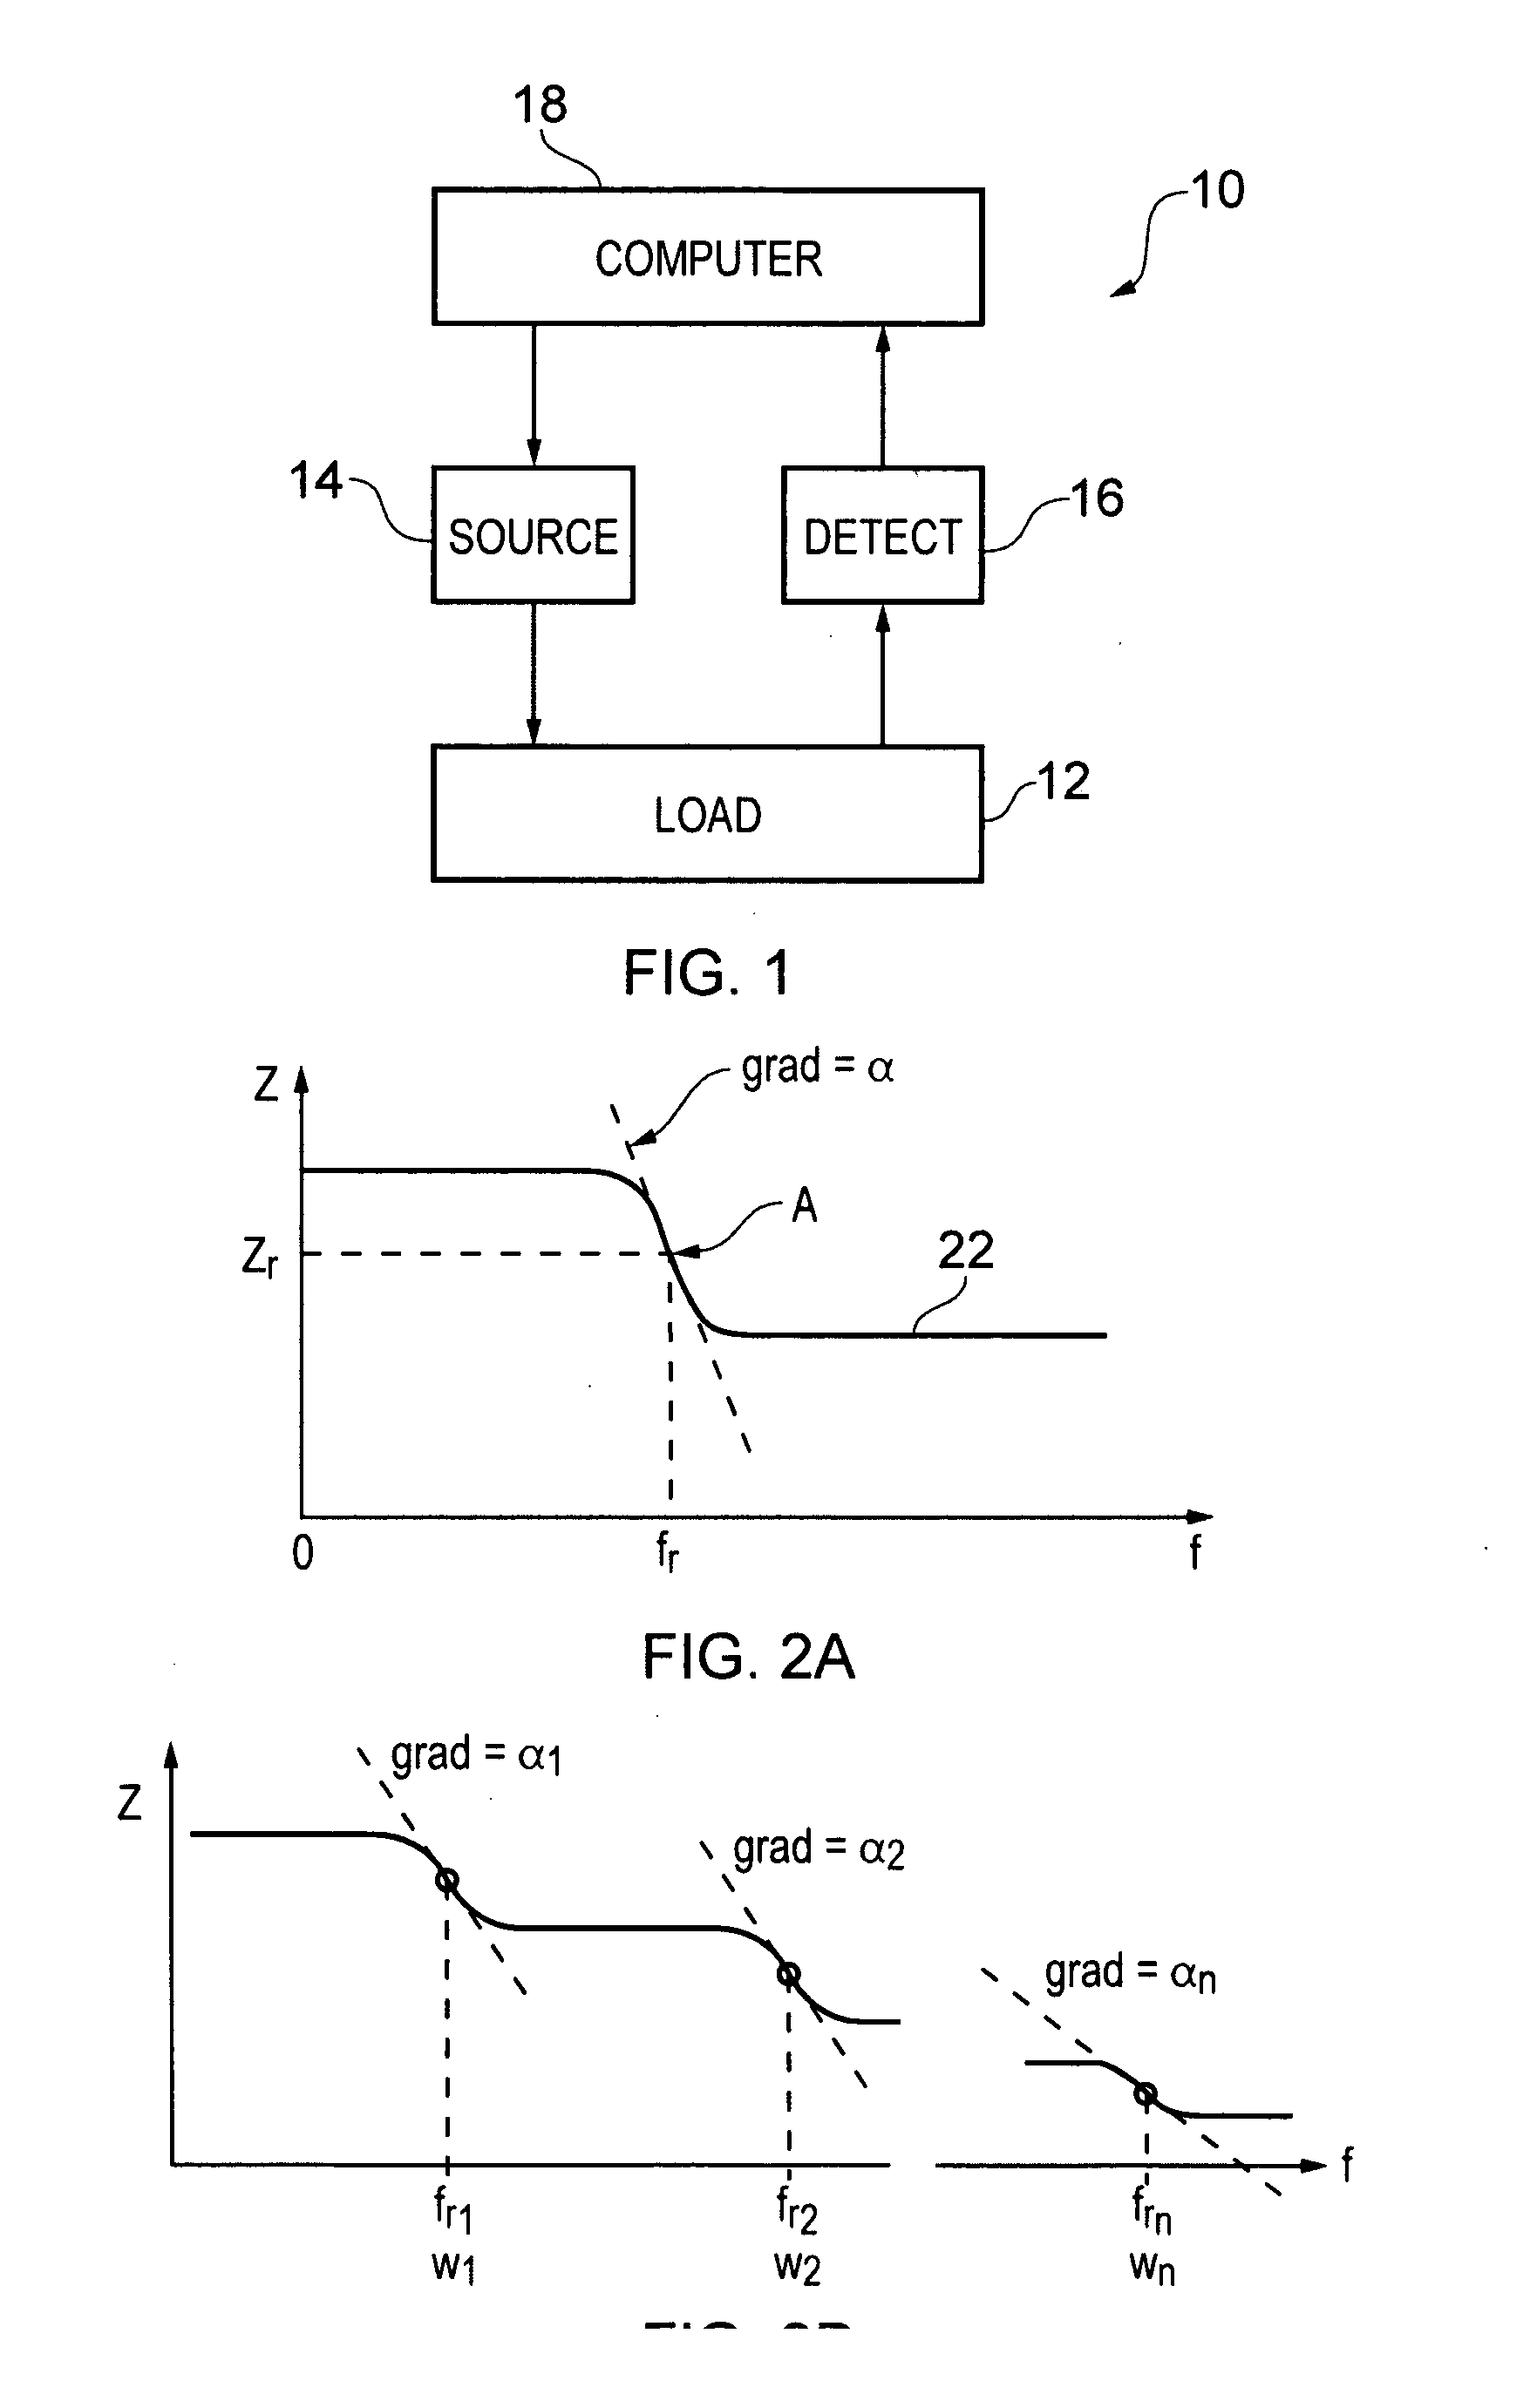 Method for analyzing the structure of an electrically conductive object